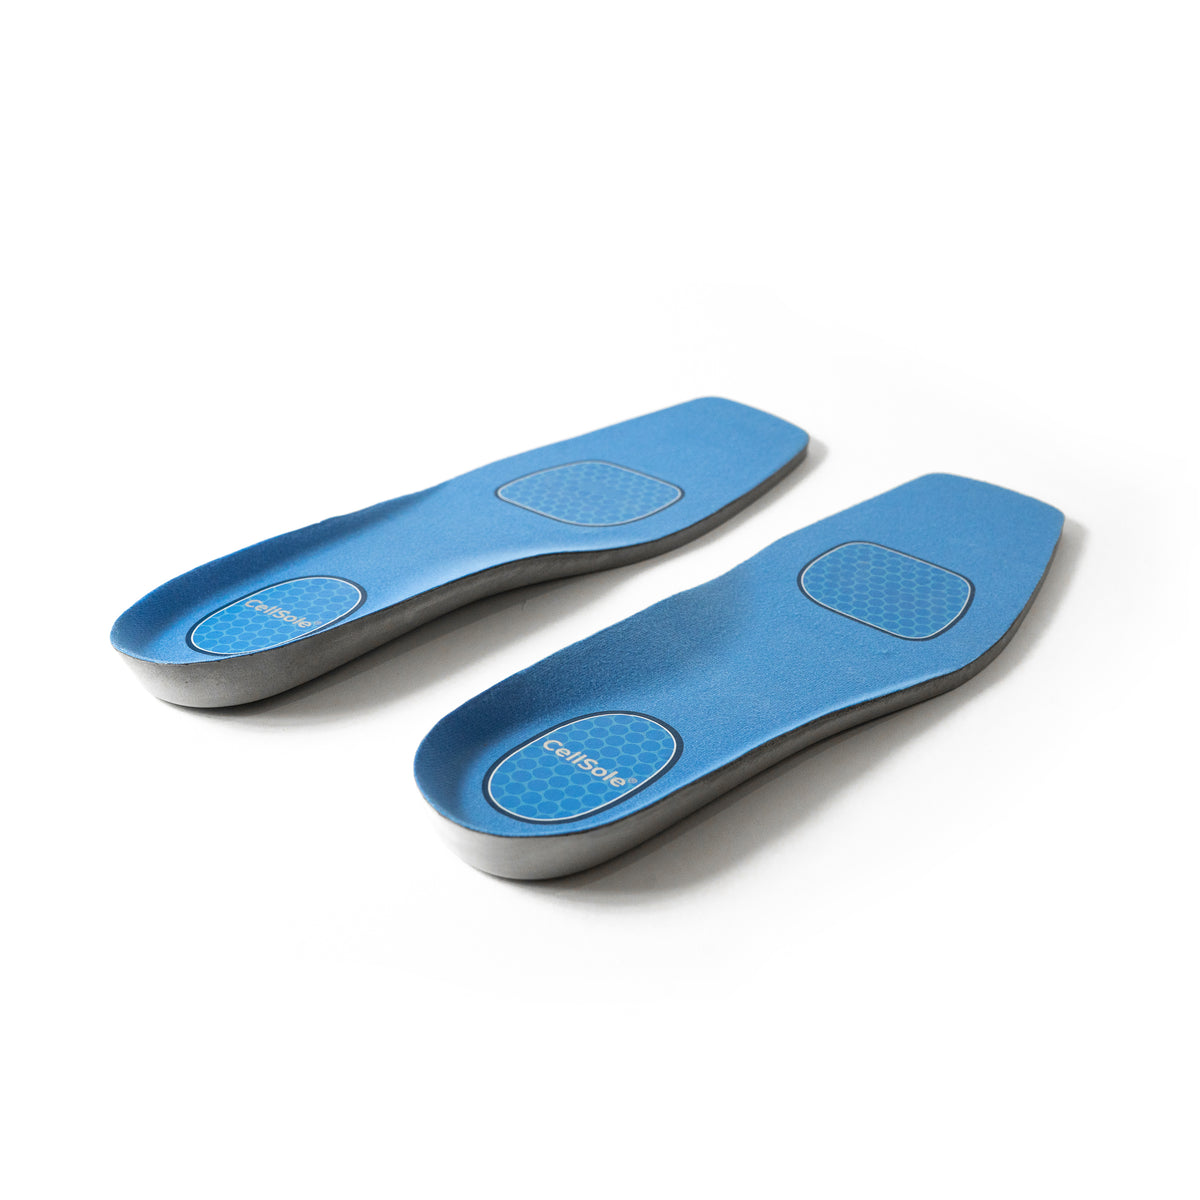 CellSole Footbed